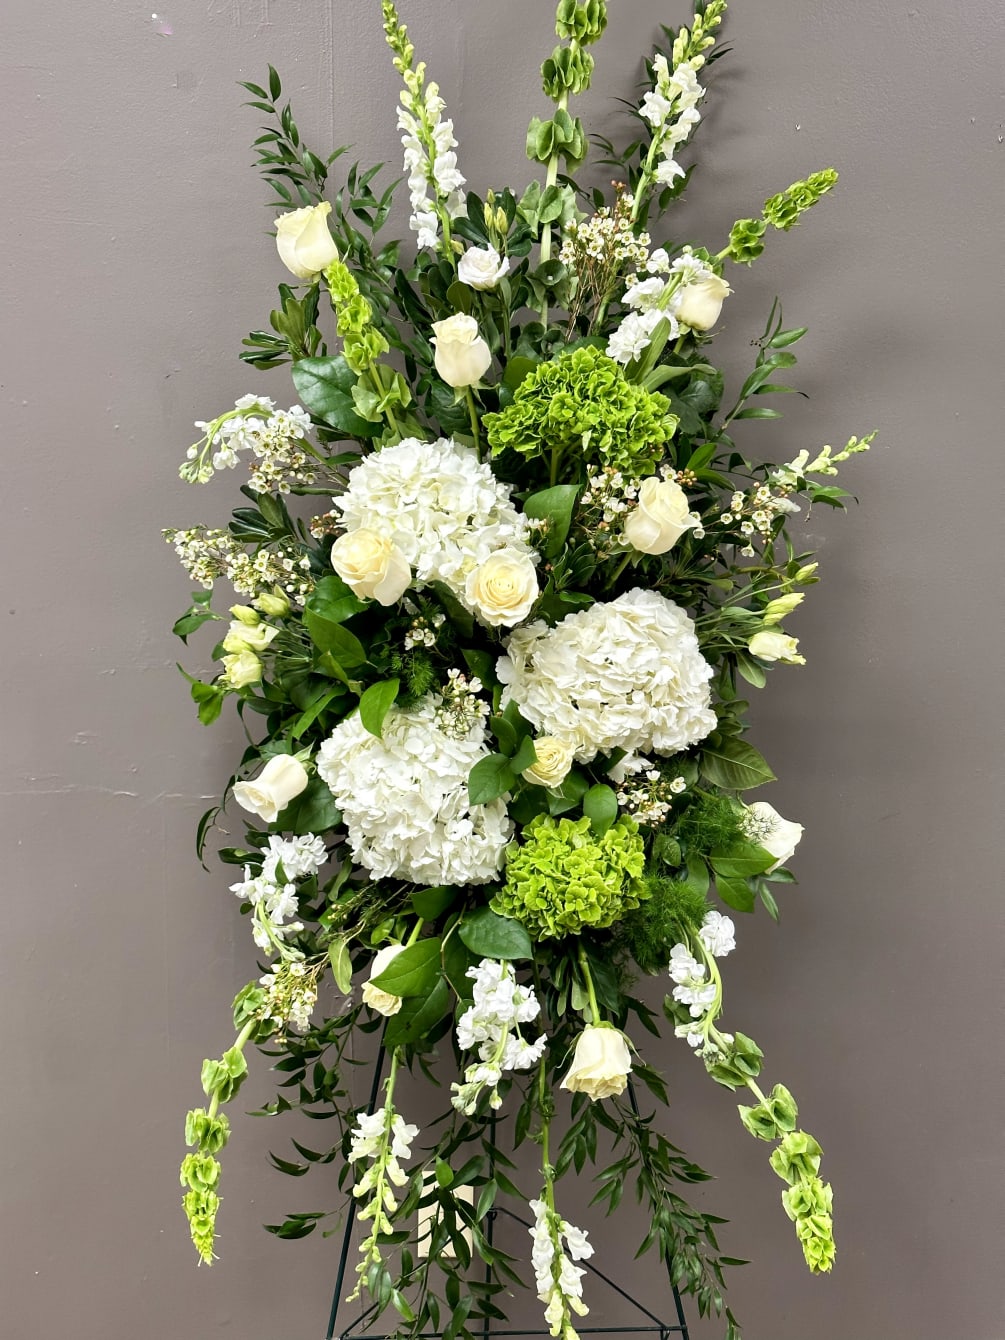 This heartfelt presentation showcases striking seasonal blooms with unique textural flowers. Customize